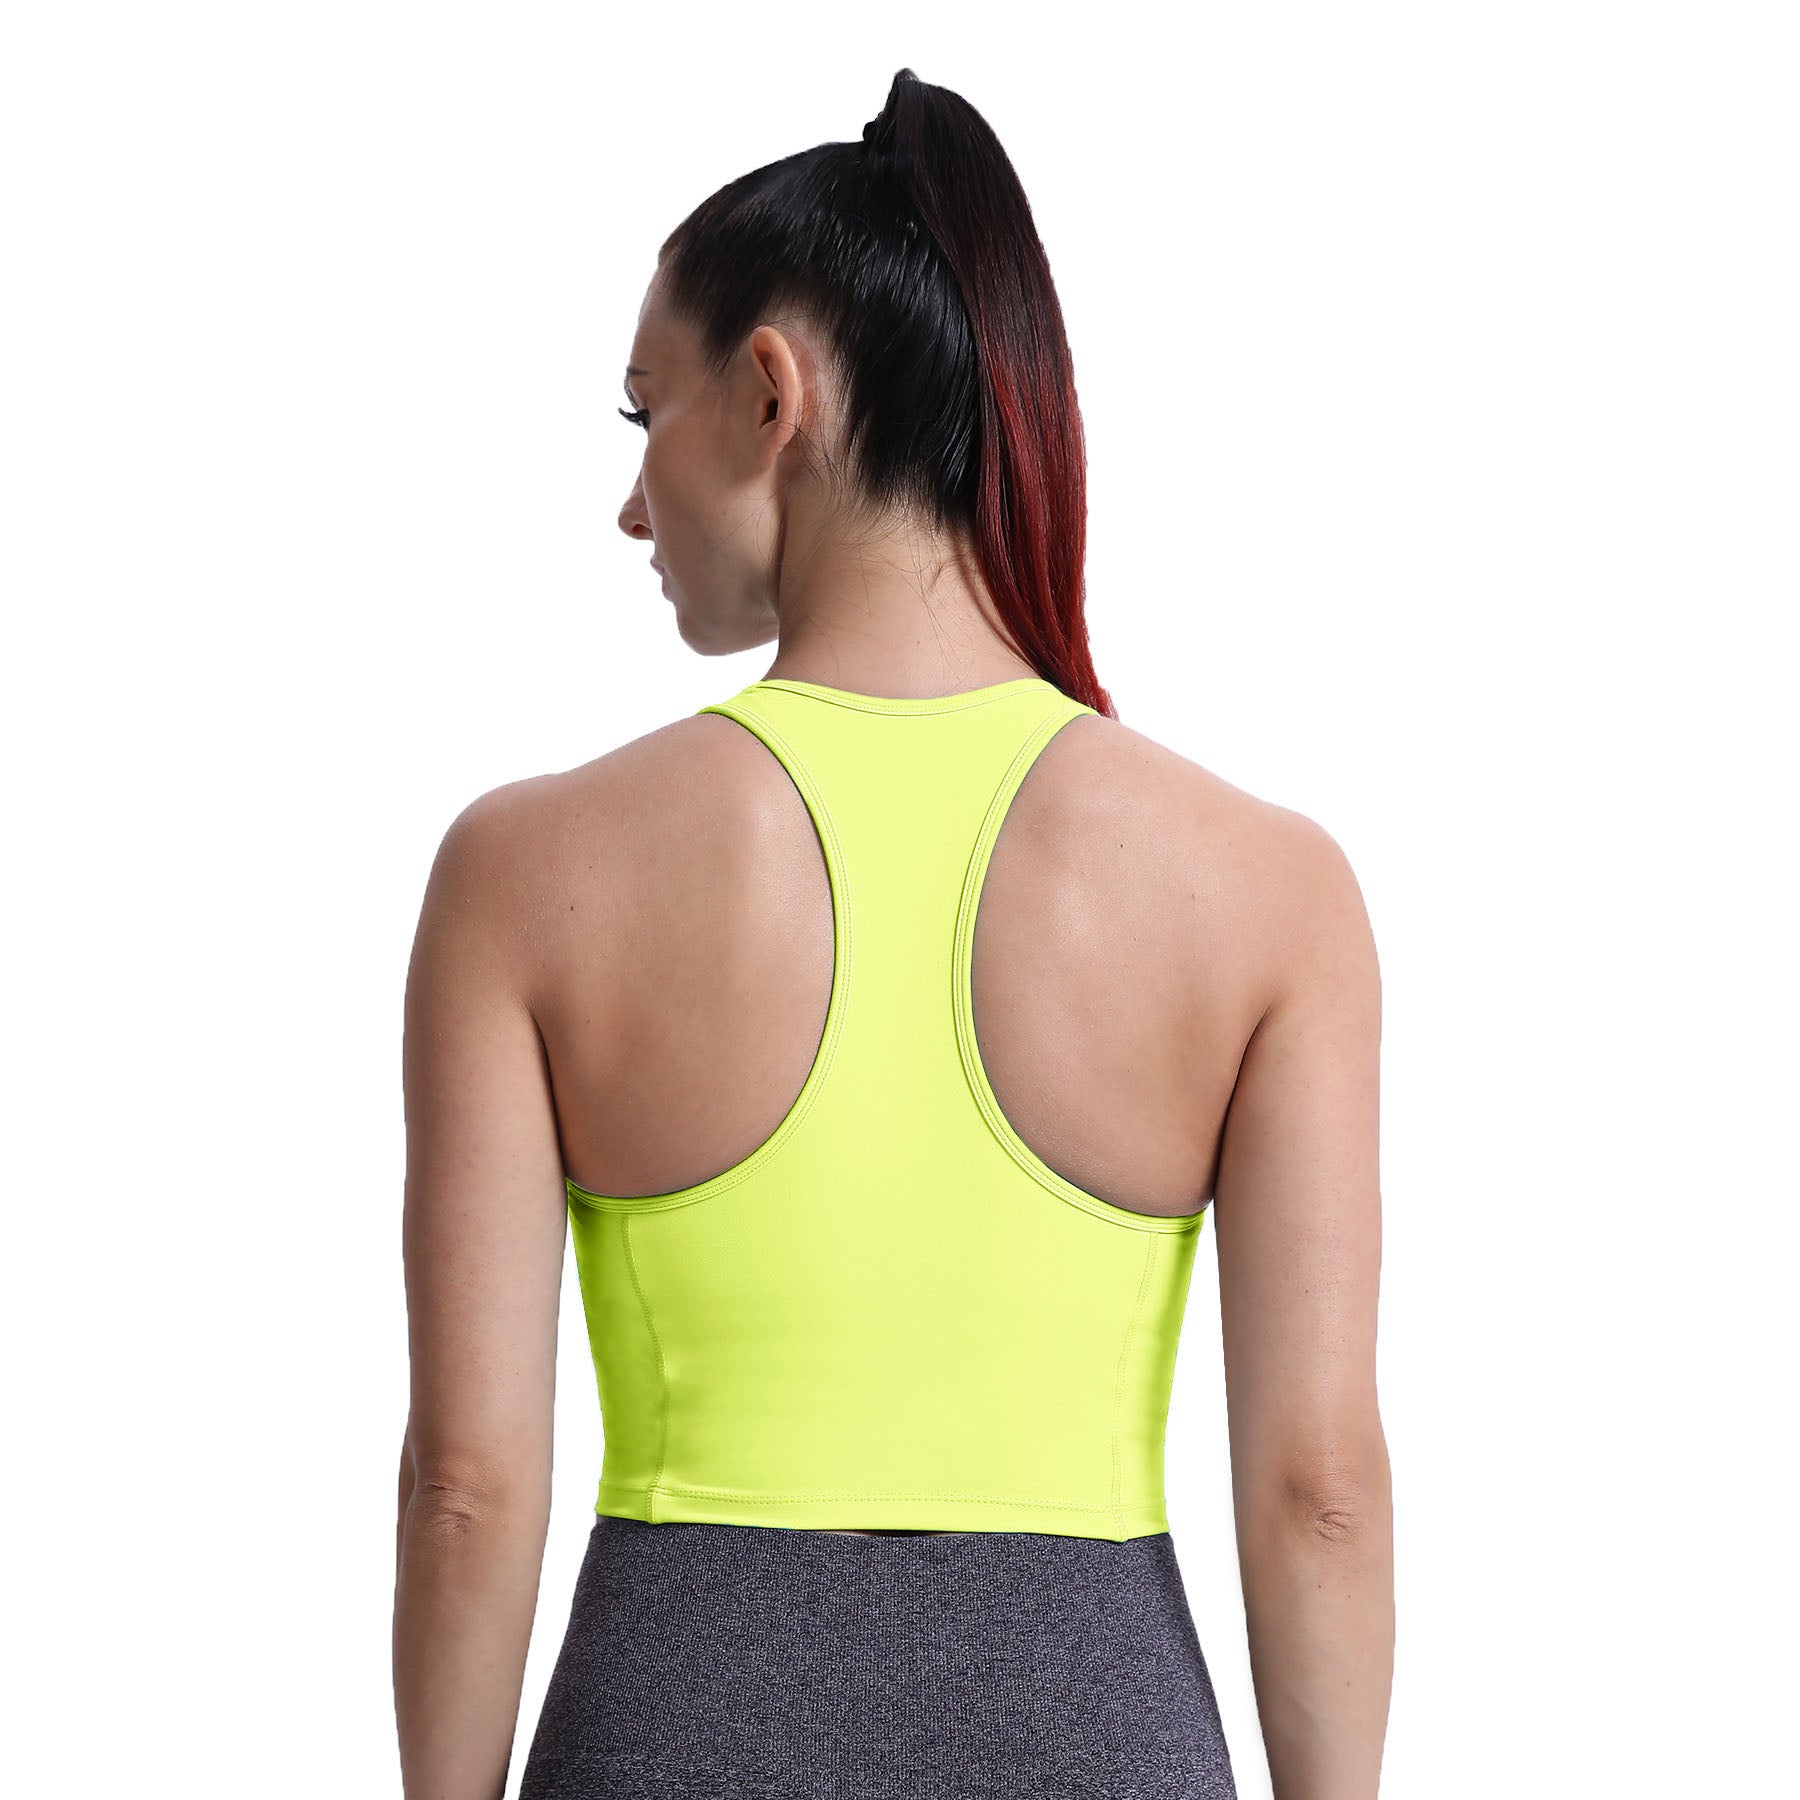 Aoxjox Racer back Tank Top